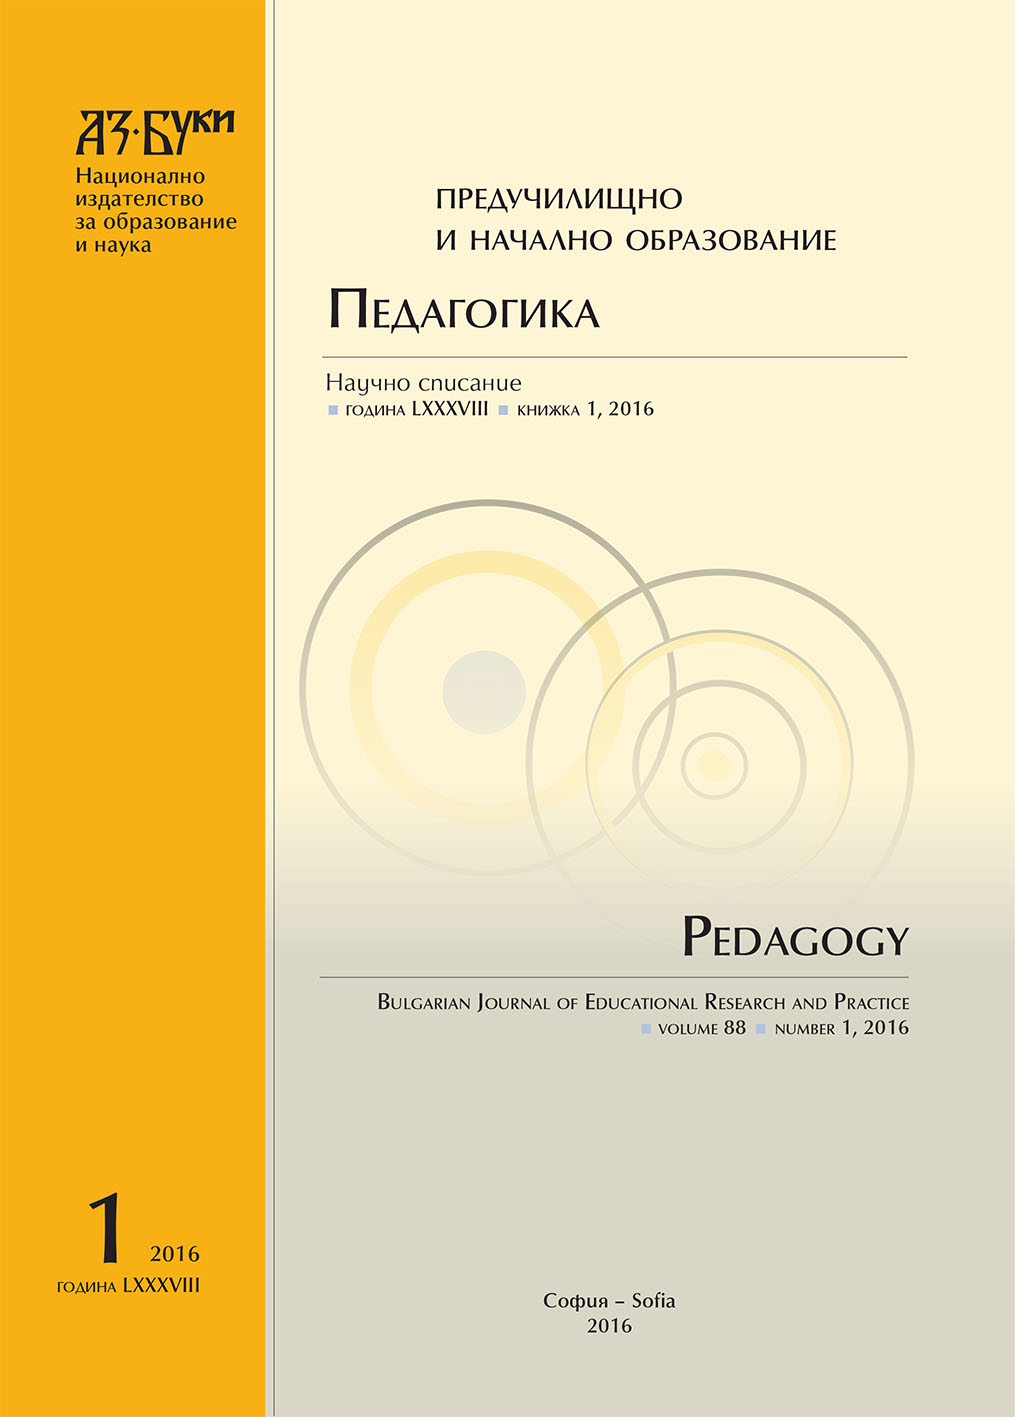 Psychological and Pedagogical Analysis of the Measures in Implementation of the National Plan for Education of Roma in Bulgaria Cover Image